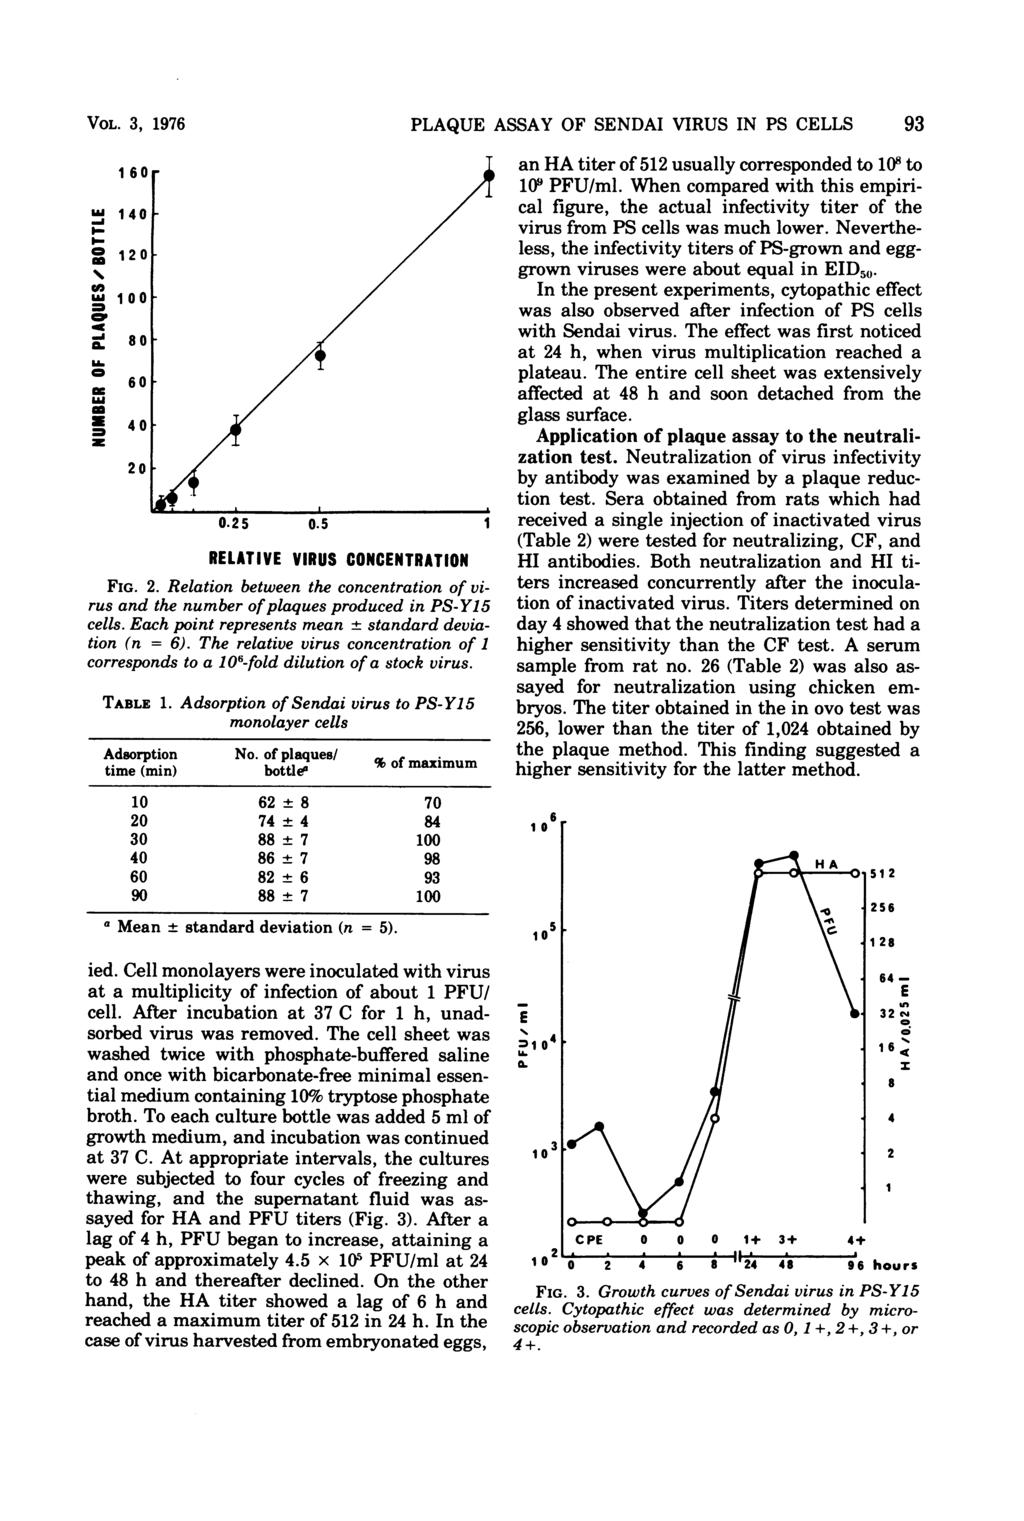 VOL. 3, 1976 PLAQUE ASSAY OF SENDAI VIRUS IN PS CELLS 93 1 61 C o. 12 U) CD 1 / / Mc 8 U- 6. 44 2.2 5.5 1 RELATIVE VIRUS CONCENTRATION FIG. 2. Relation between the concentration of virus and the number ofplaques produced in PS-Y15 cells.